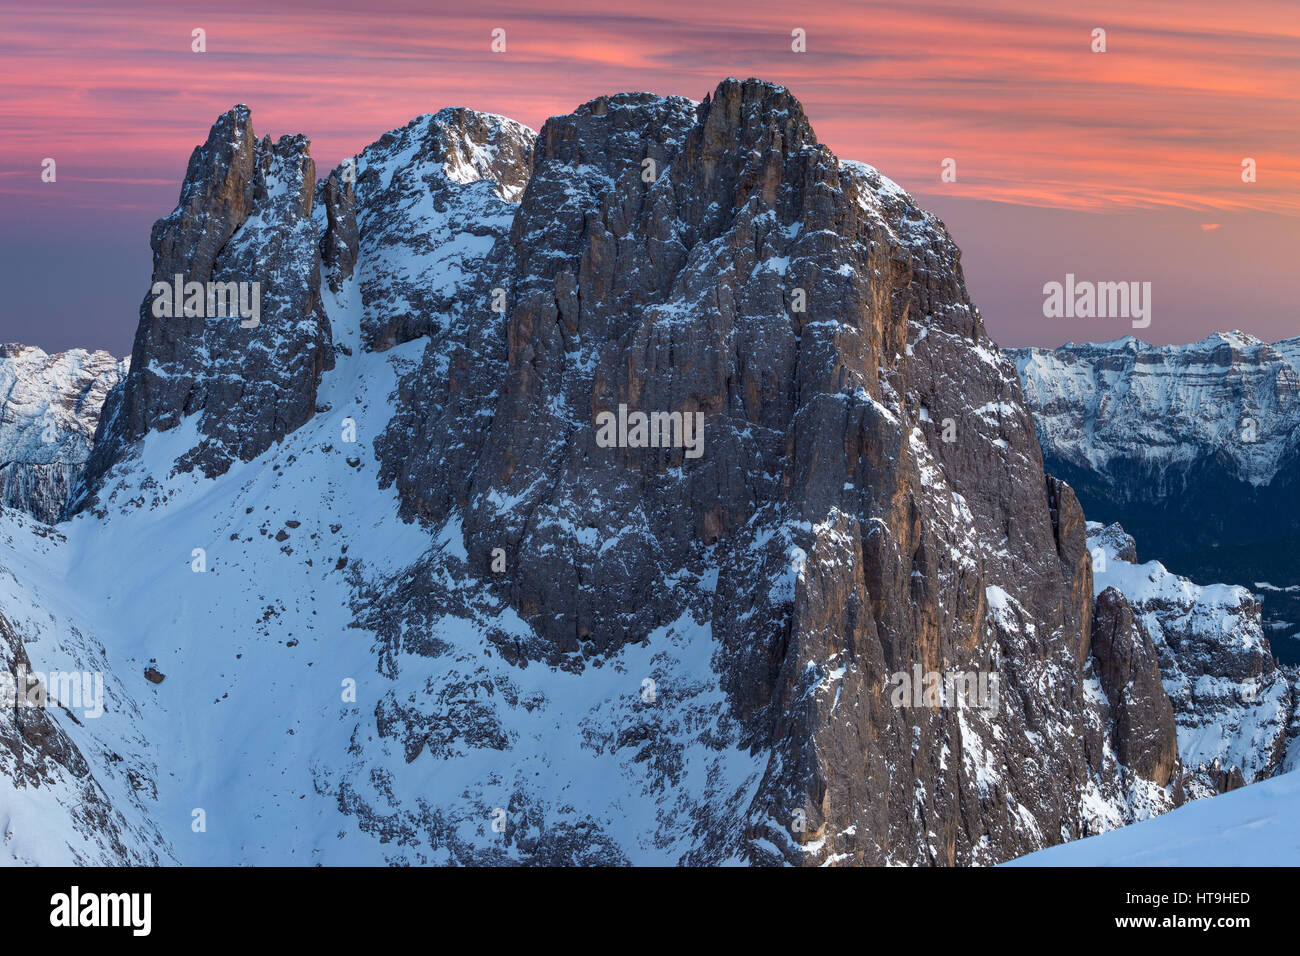 The Pale di San Martino mountain group. Twilight at sunset. The Ball and Val di Roda peaks,  The Dolomites of Trentino. Italian Alps. Europe. Stock Photo